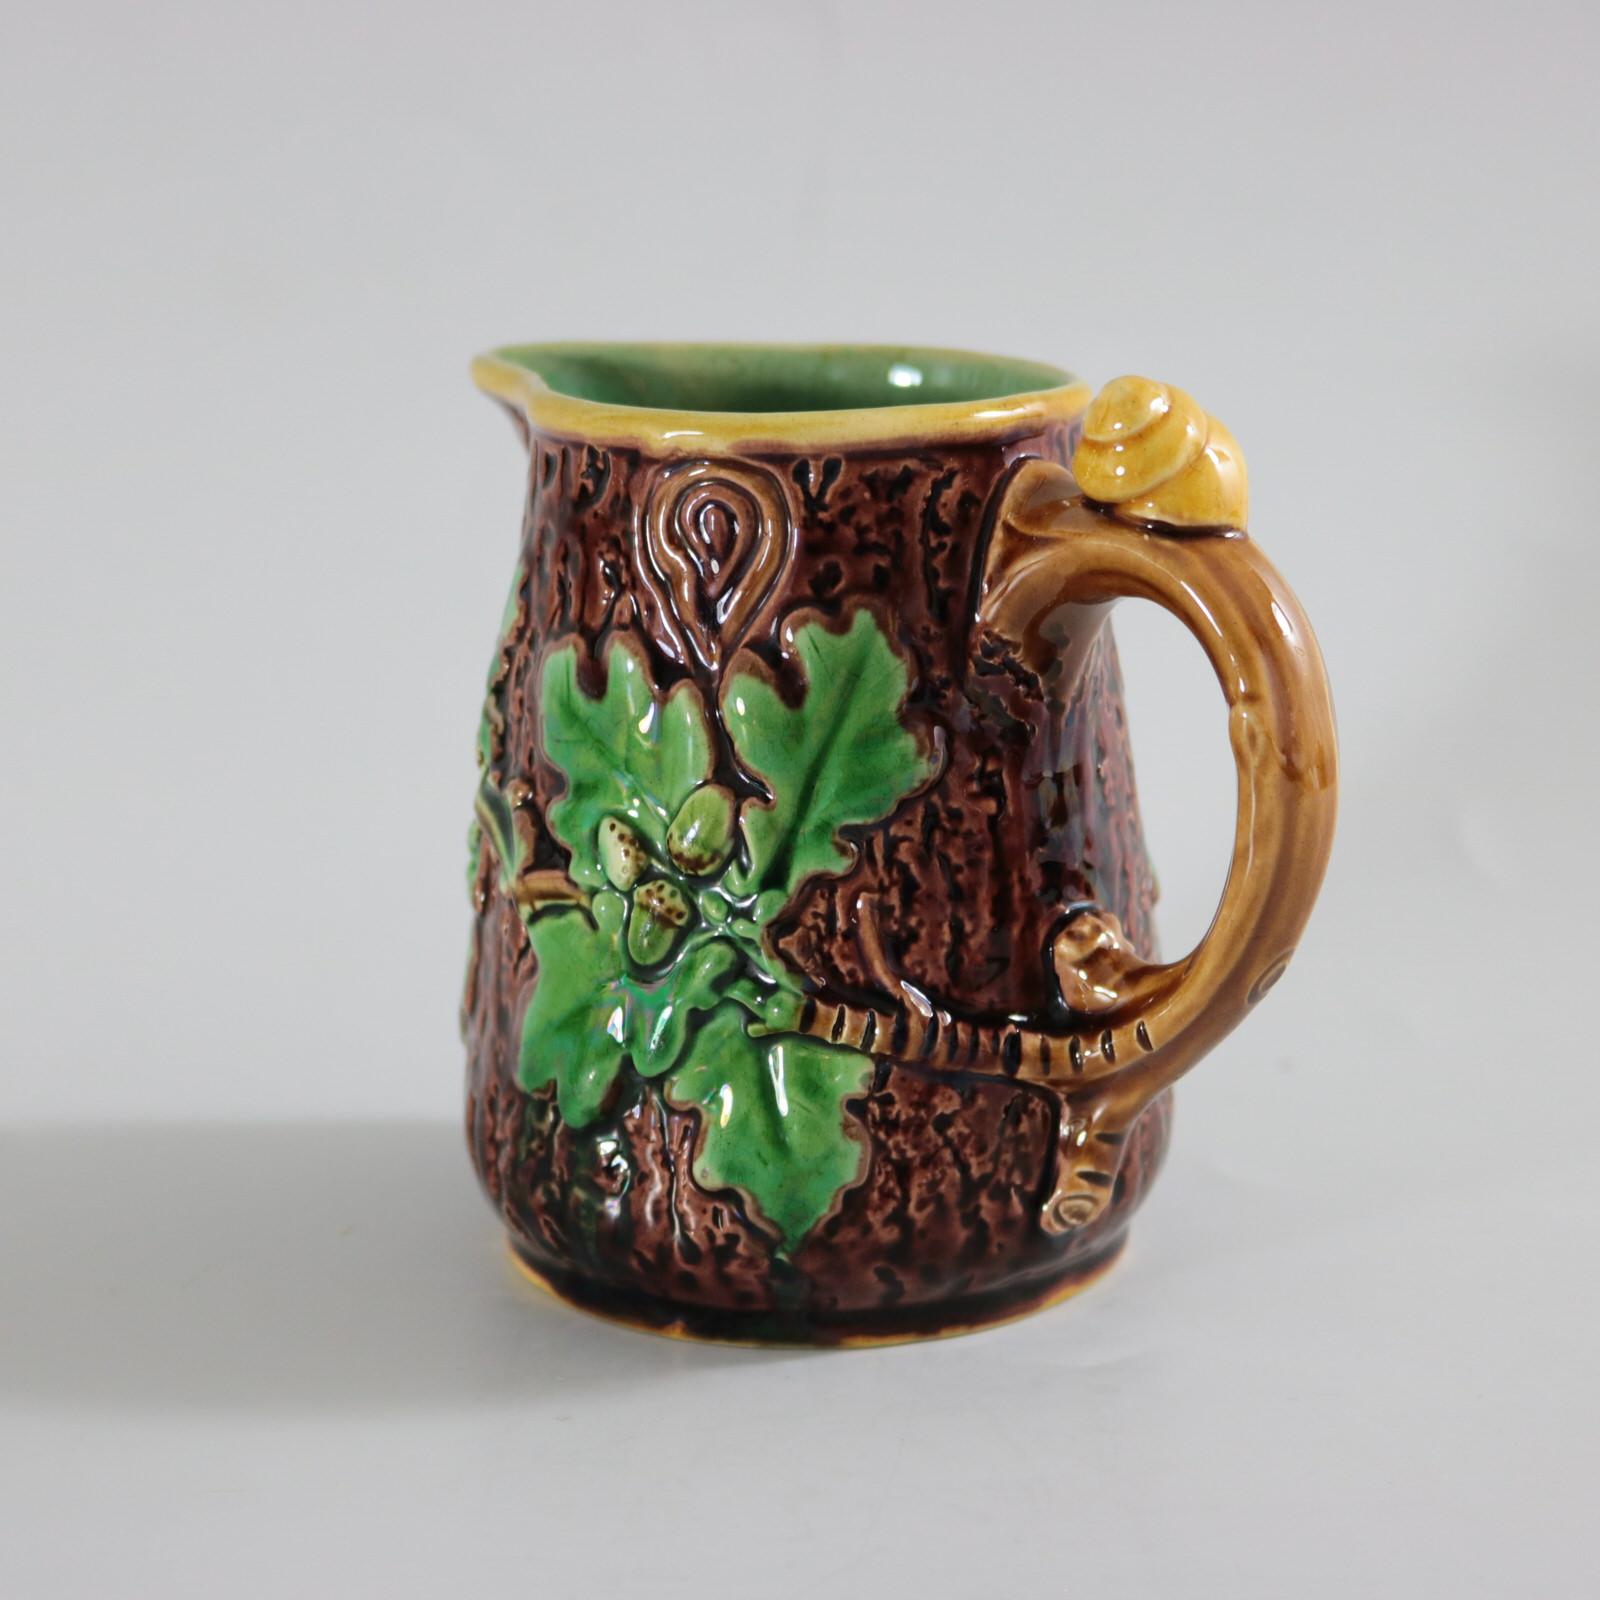 Minton Majolica jug/pitcher which features oak leaves and acorns to the sides and a snail to the handle. Colouration: brown, green, yellow, are predominant. The piece bears maker's marks for the Minton pottery.